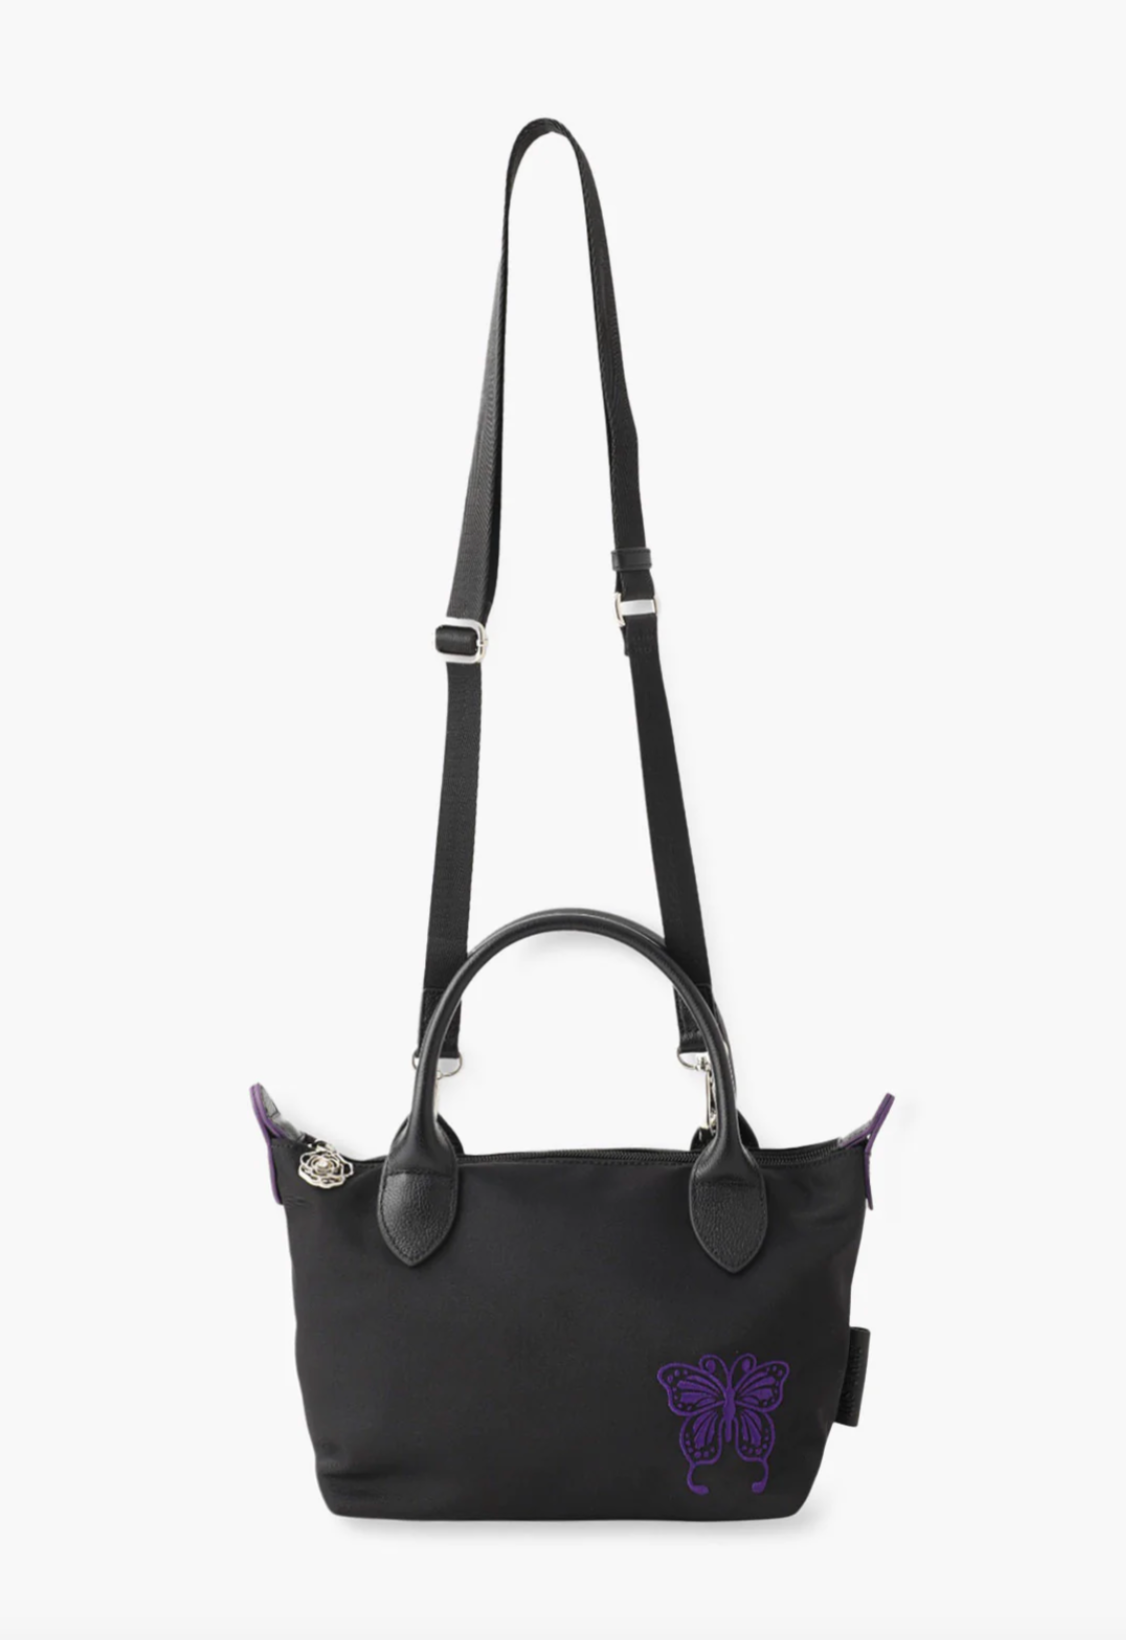 Small Voyage Tote in black, zipper rose with a gemstone pull tab, long over shoulder straps